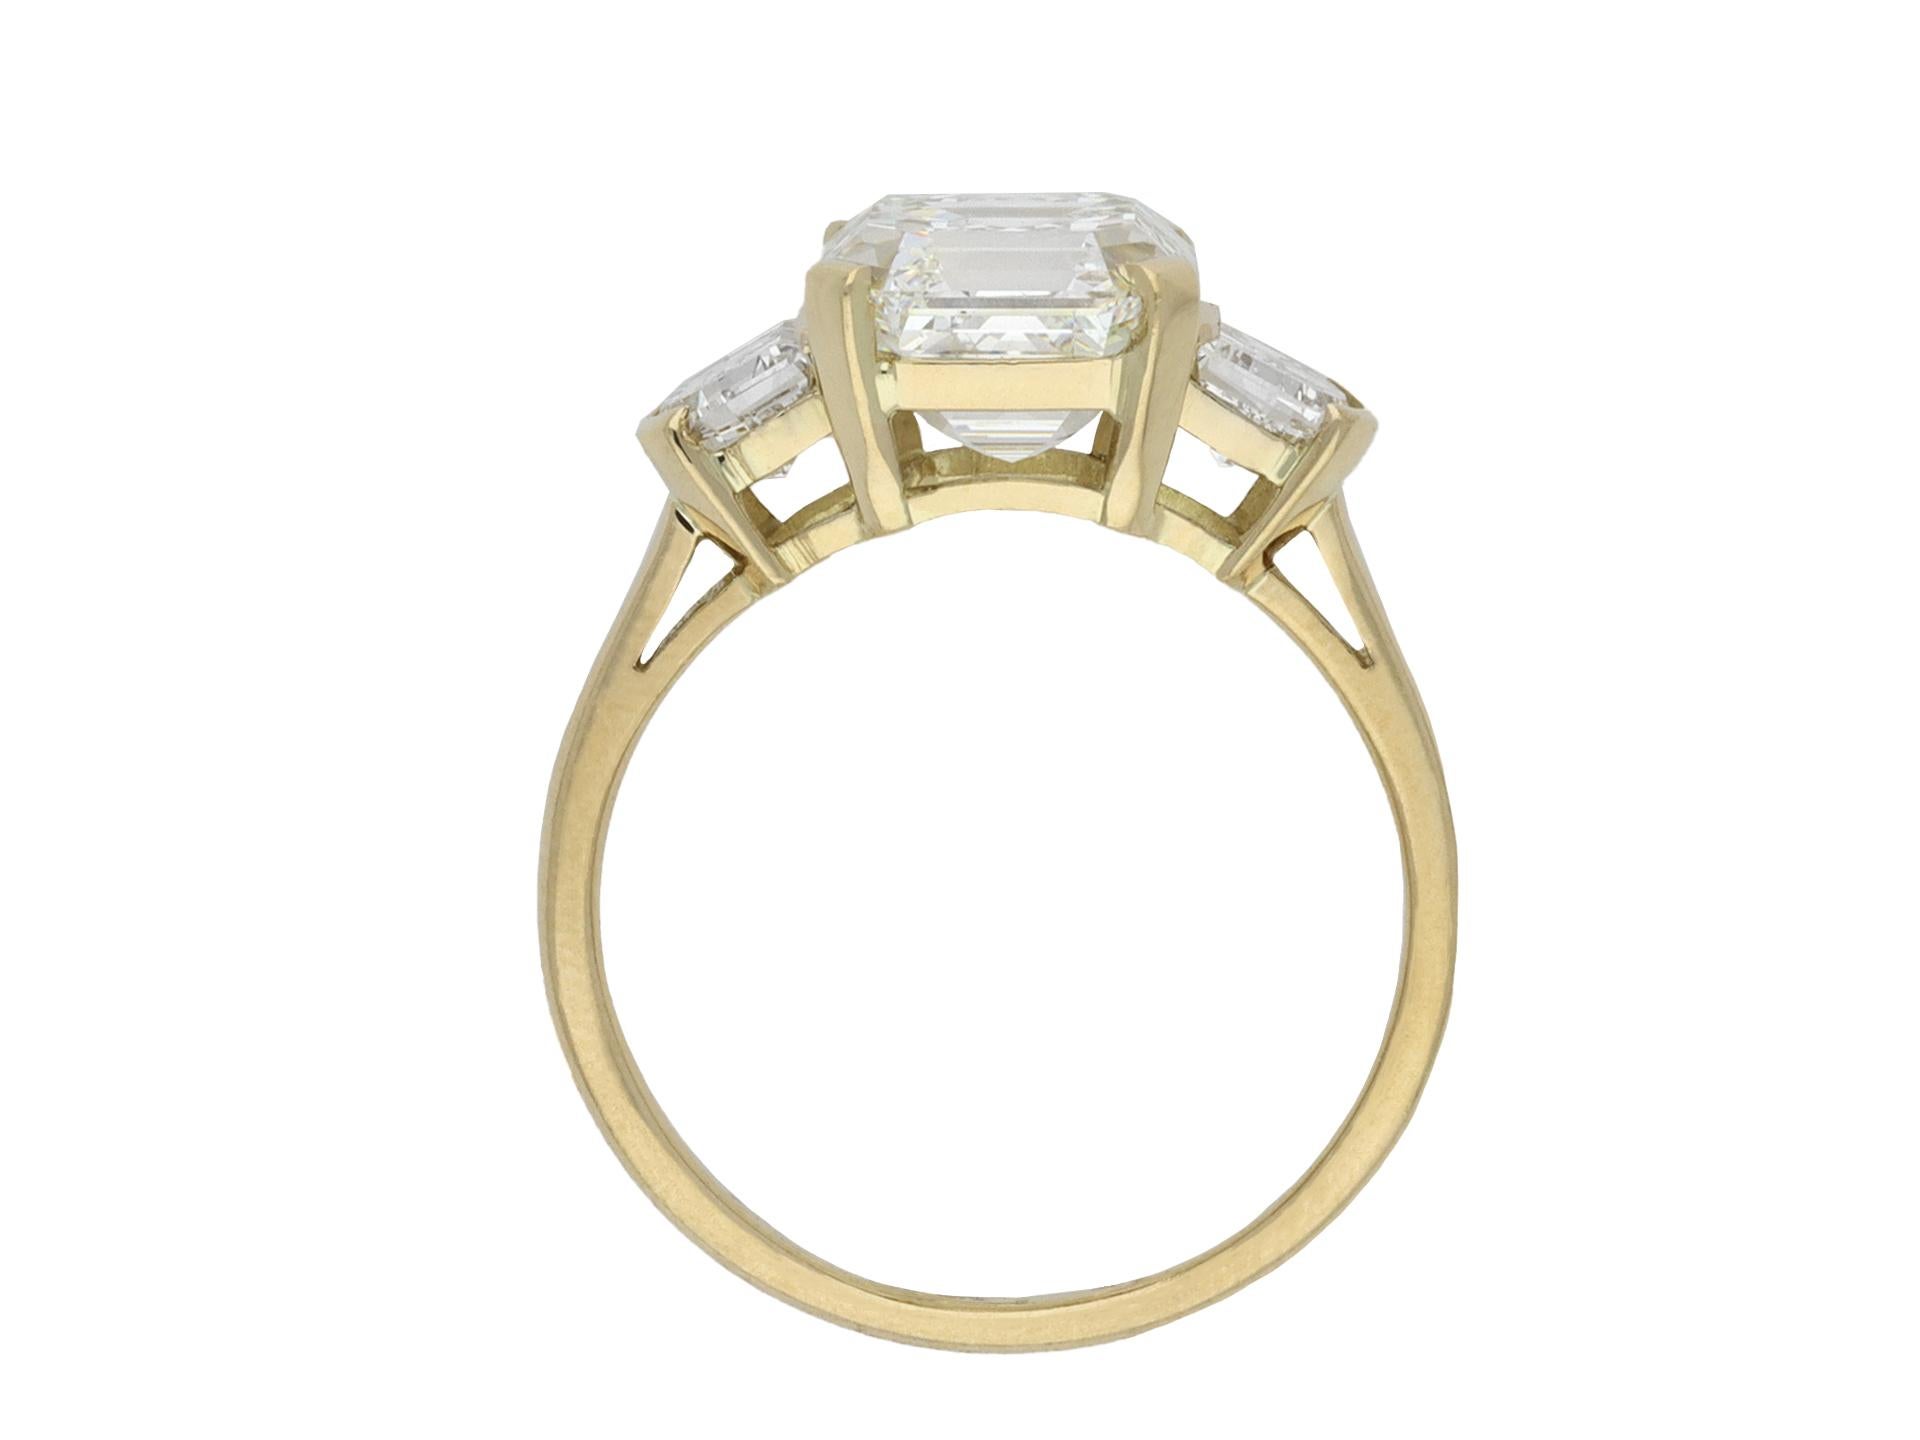 Asscher cut diamond flanked solitaire ring. Set with an Asscher diamond, H colour, VVS1 clarity, with an approximate weight of 3.03 carats in an open back claw setting, further set with two D-shape step cut diamonds in open back half rubover